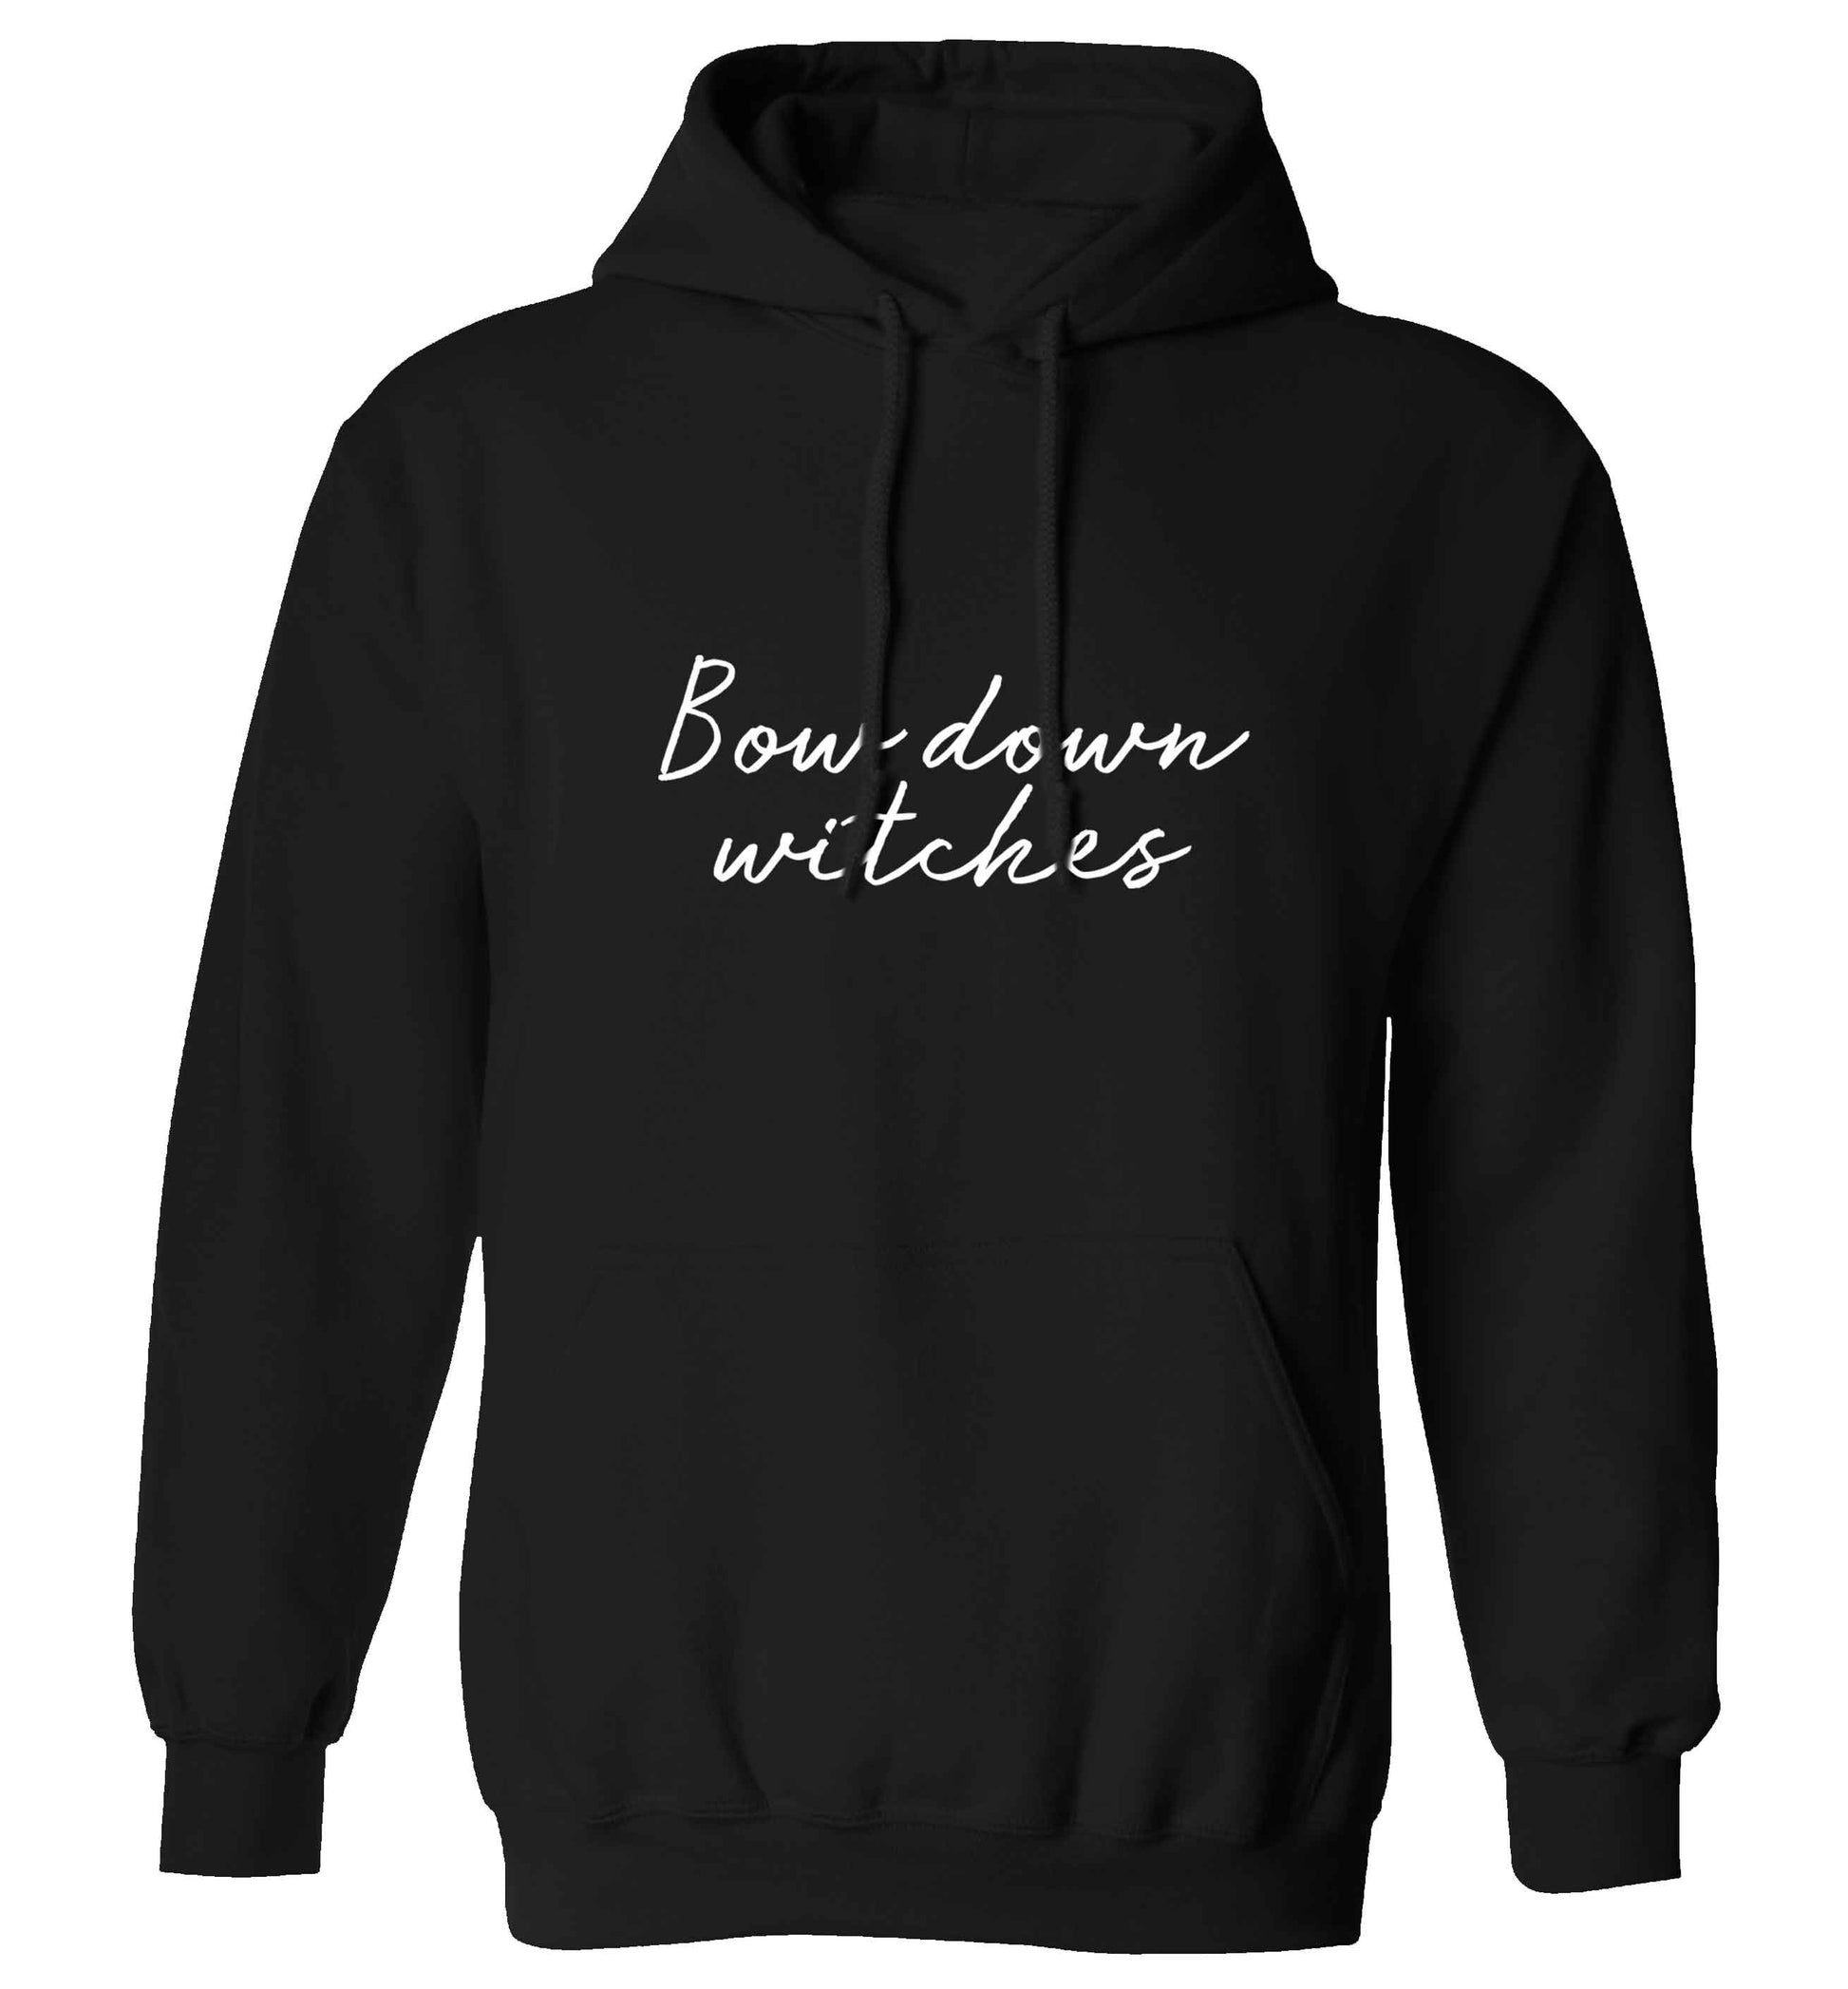 Bow down witches adults unisex black hoodie 2XL